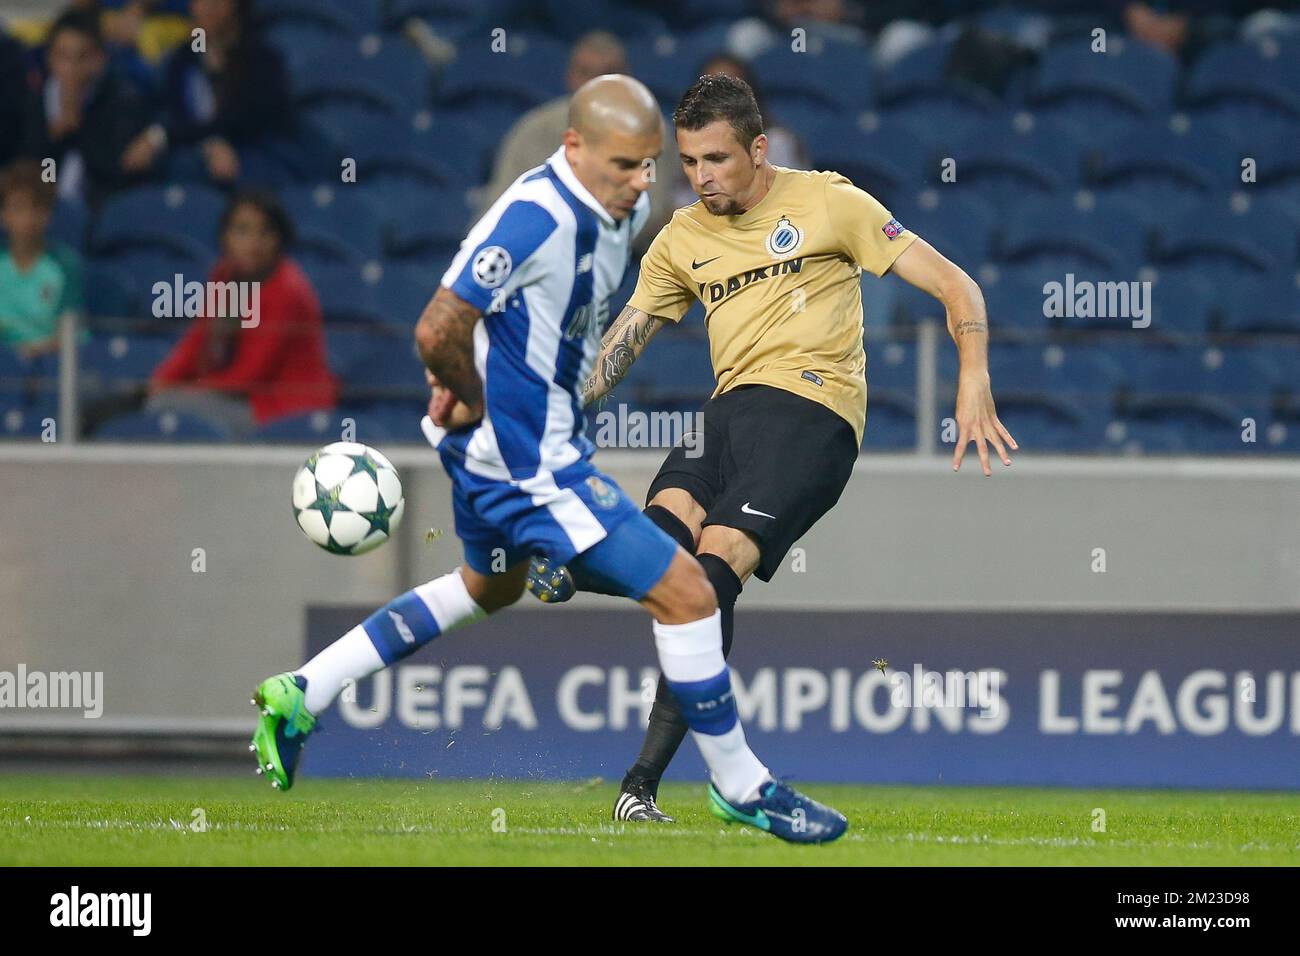 Porto's defender Maxi Pereira and Club's Claudemir Domingues De Souza fight for the ball during the fourth game of the group stage between Portuguese soccer team Porto and Belgian soccer team Club Brugge in the Champions League competition, on Wednesday 02 November 2016, in Porto, Portugal. BELGA PHOTO BRUNO FAHY Stock Photo